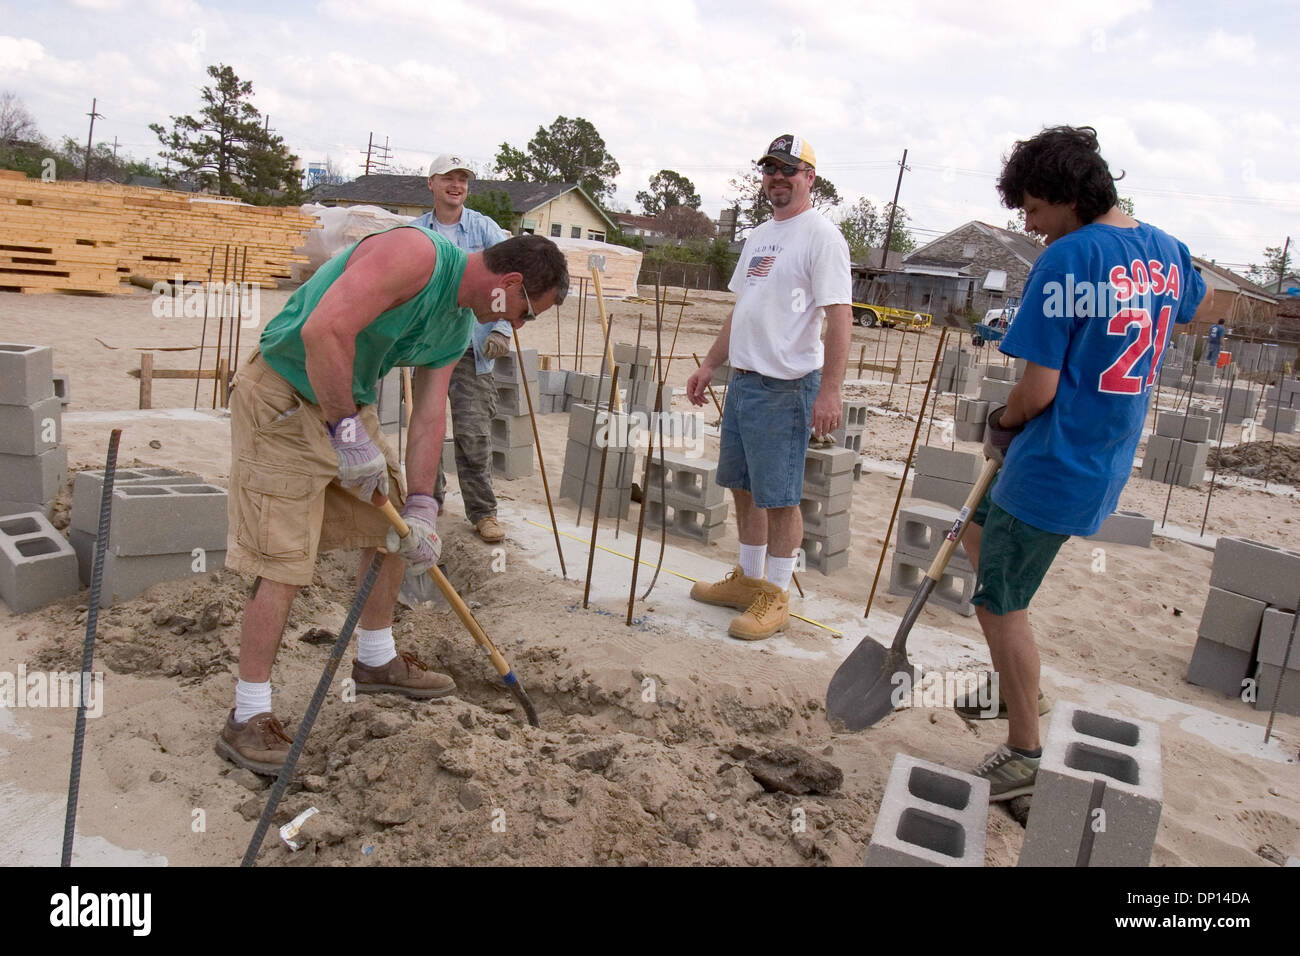 Apr 18, 2006; New Orleans, LA, USA; Musician Fredy Omar (R) puts in his 'sweat equity' as the first musician to be approved for a house in Habitat for Humanity's Musician's Village in New Orleans' Upper Ninth Ward. Working with him are members of the First Presbyterian Church in Beaver, PA. They are (L-R) Chuck Verrett, who owns an ad agency in Beaver Falls; Jack Hall, a software d Stock Photo